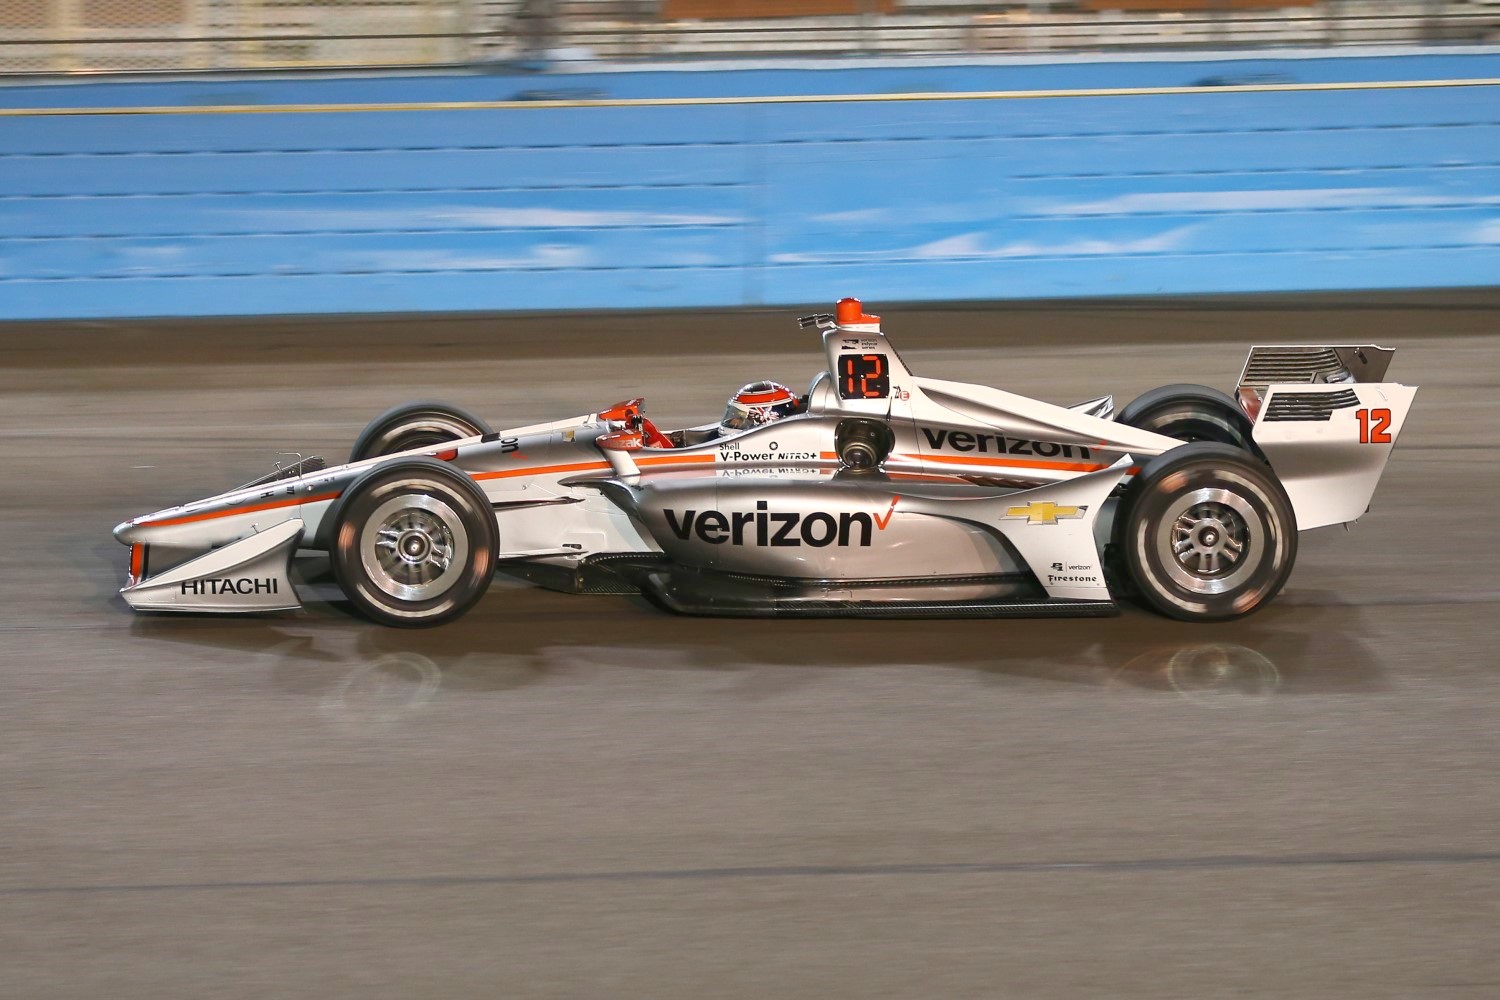 Will Power was 2nd quick in the final night session